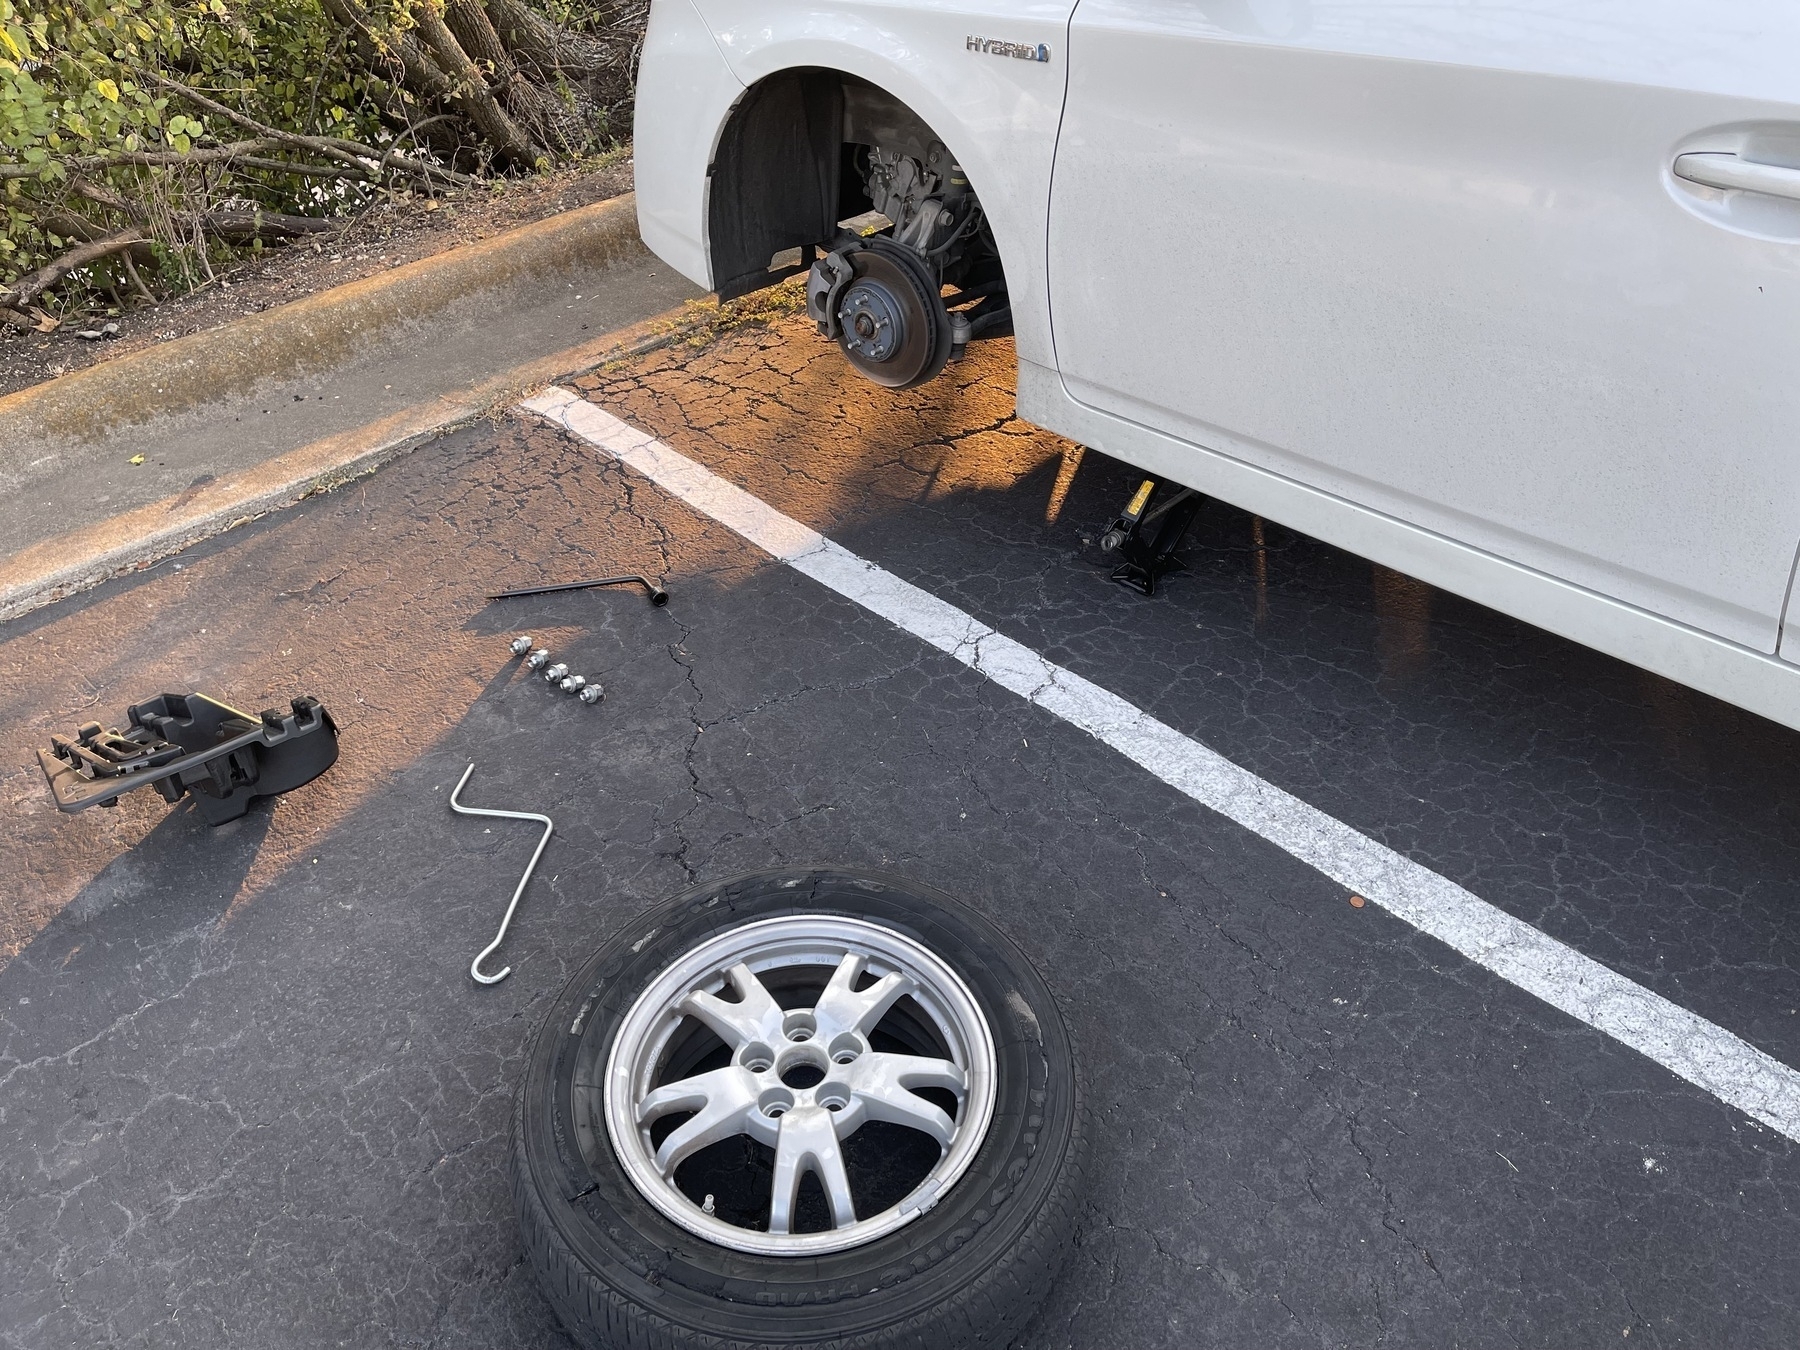 The front left side of a white Toyota Prius is shown on a jack with its tire removed. The tire is down on the next parking spot over, showing damage. Various tools are next to the tire on the ground.